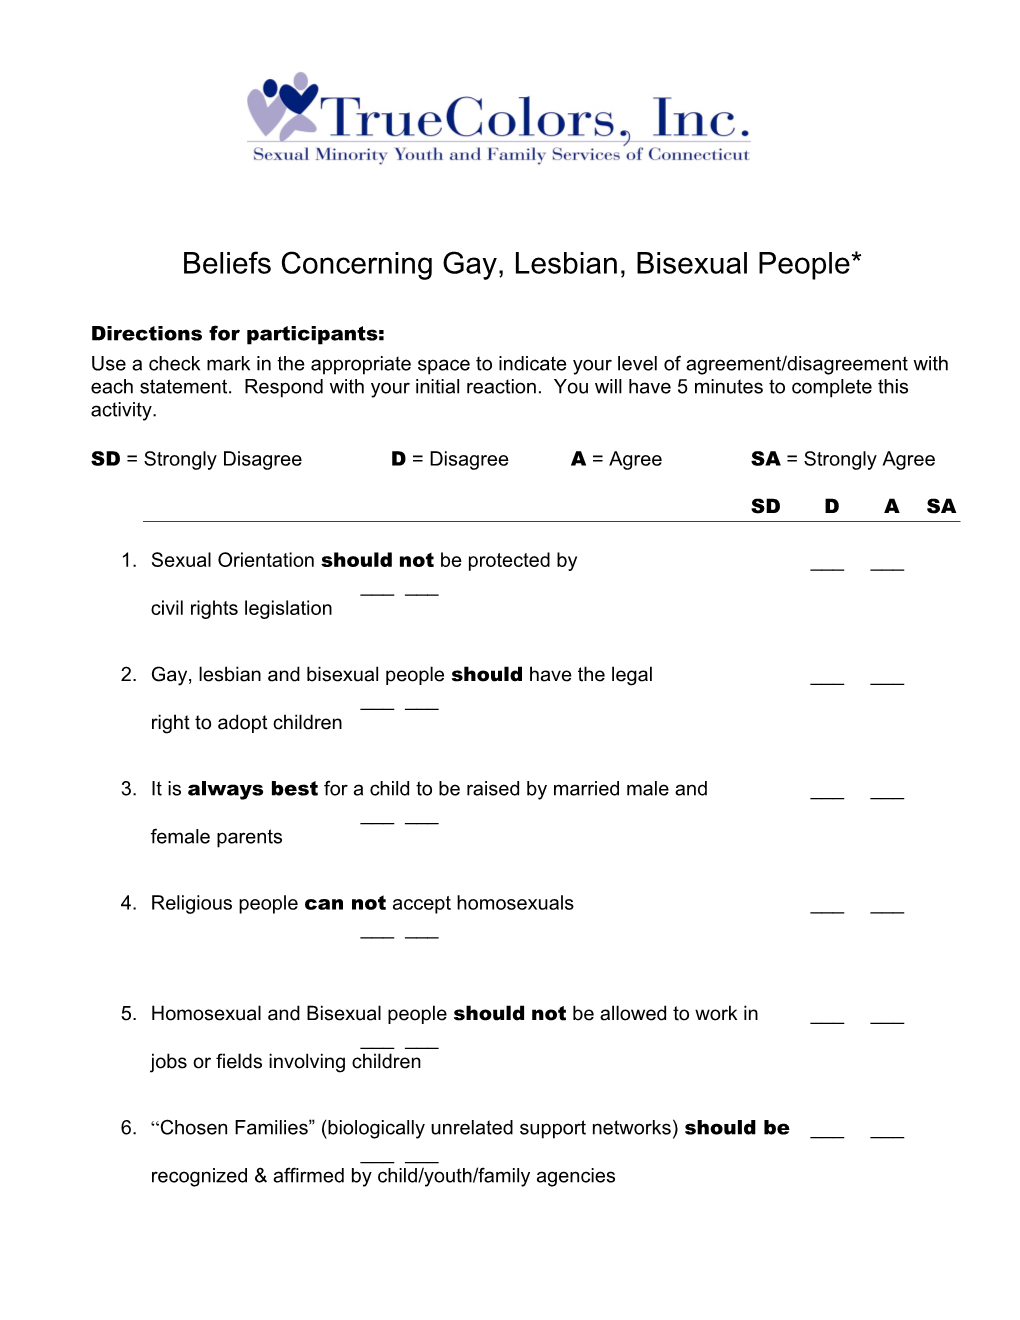 Beliefs Concerning Gays, Lesbians and Bisexuals *